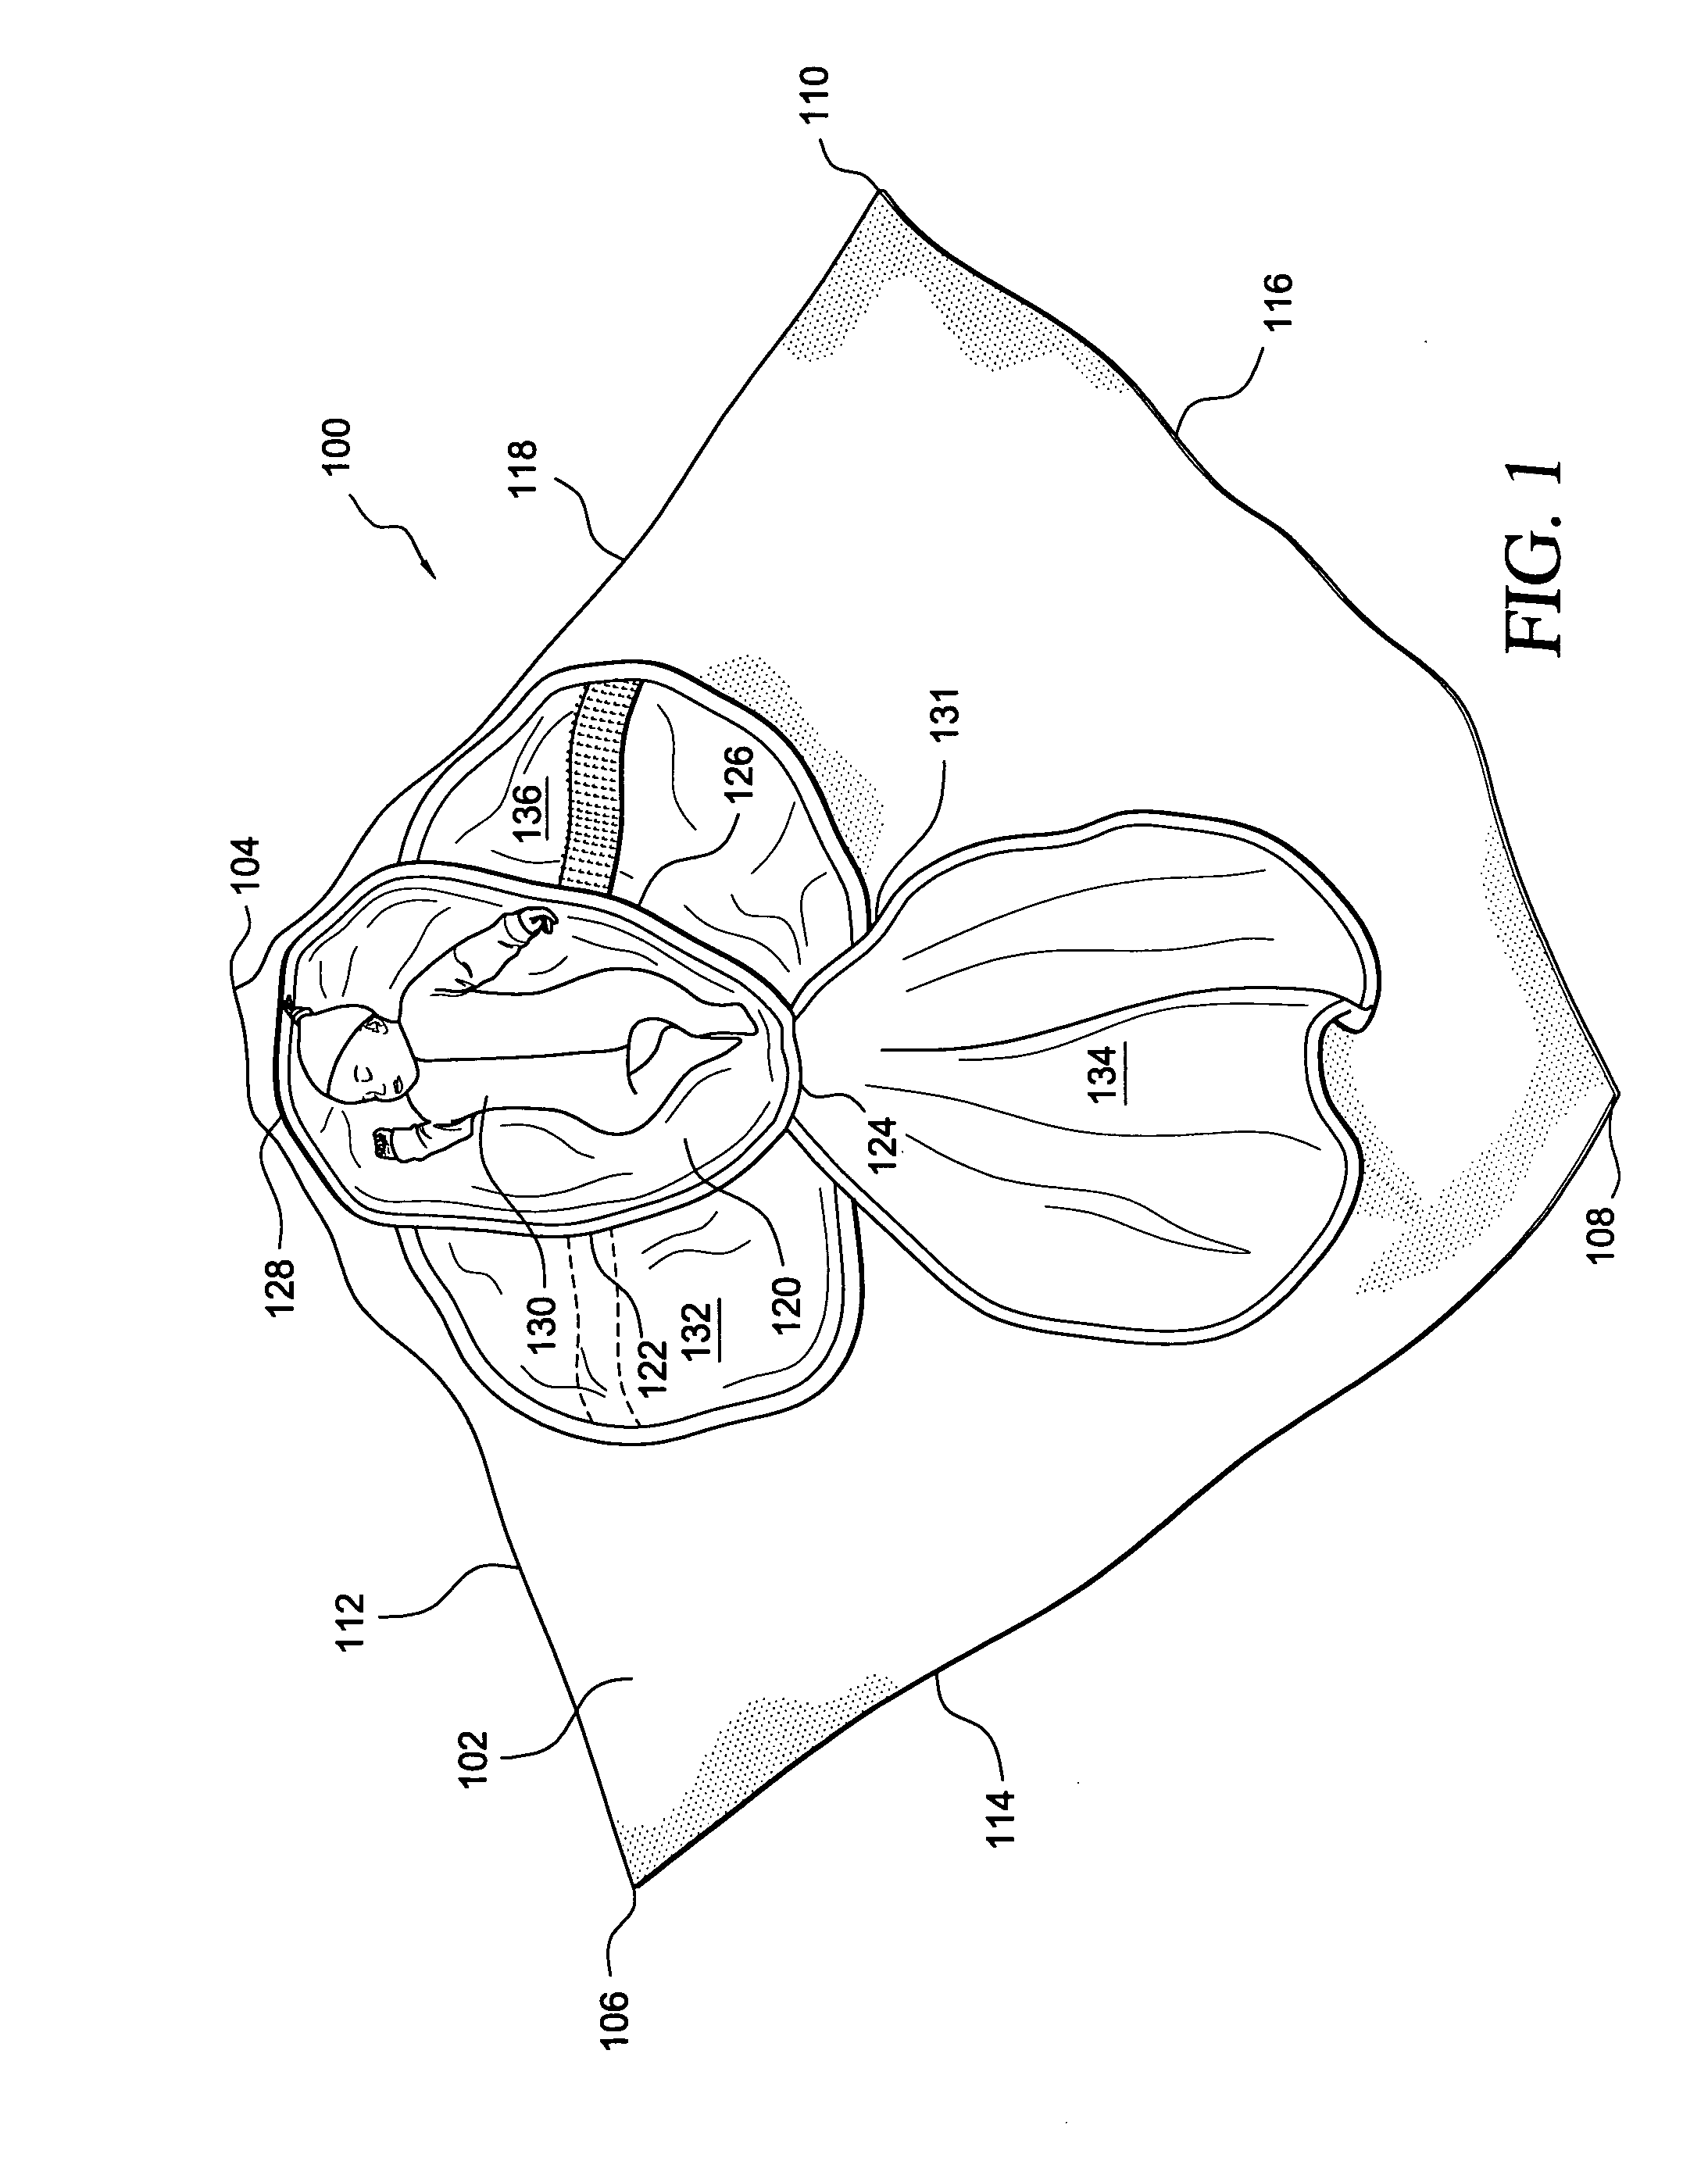 Swaddling blanket, paticularly for use in connection with premature infants, and method of using the same